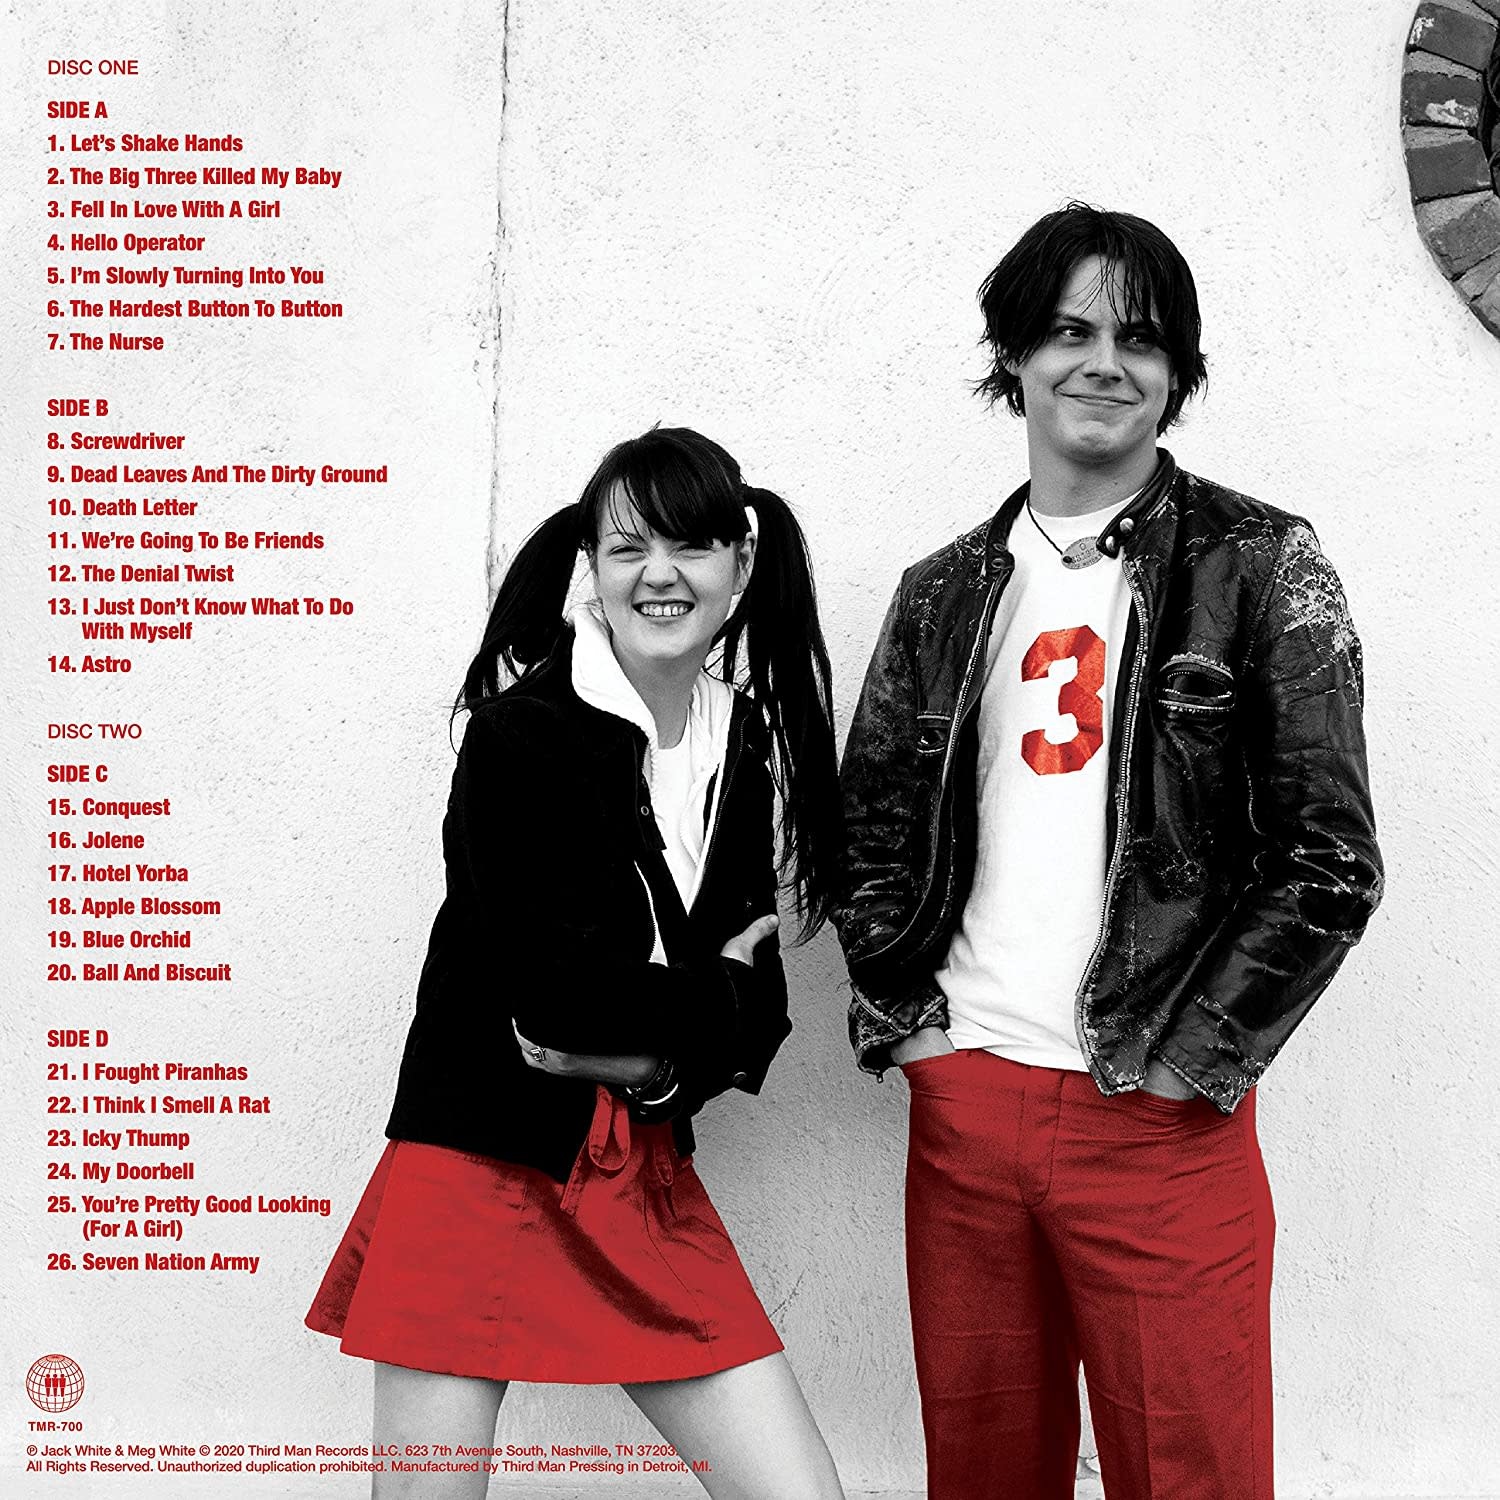 White Stripes ‎– My Sister Thanks You And I Thank You The White Stripes Greatest Hits